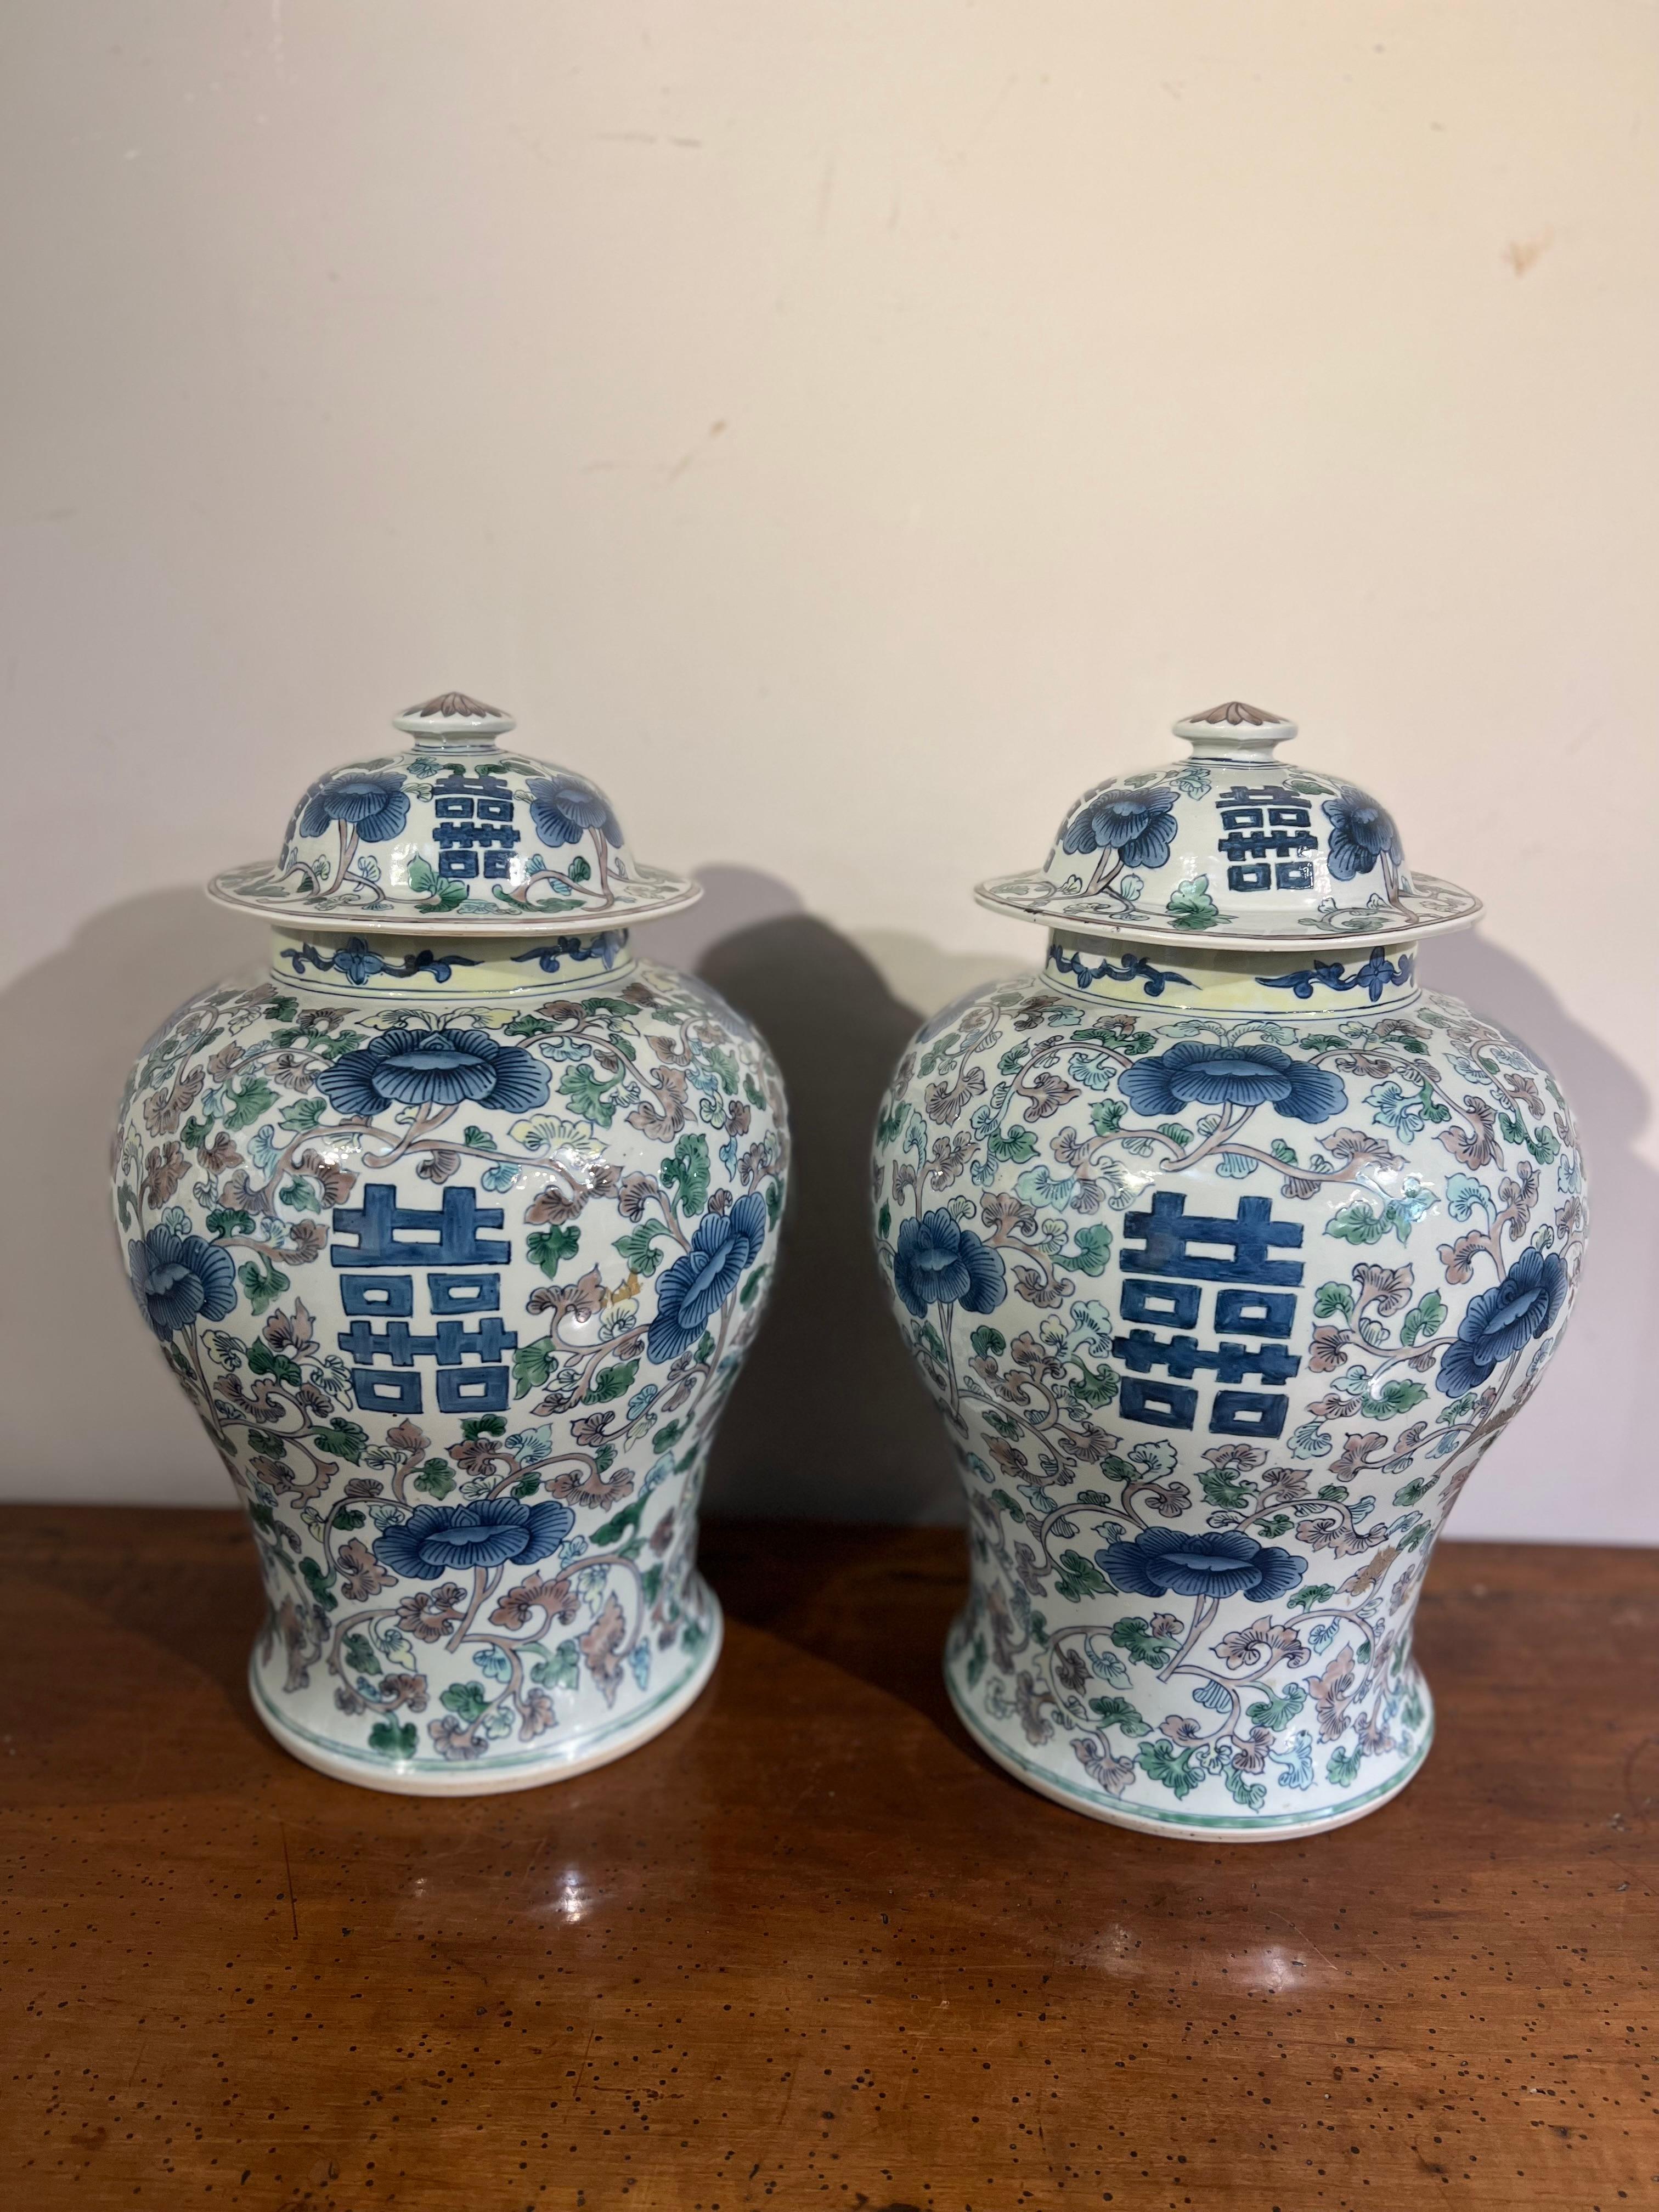 Beautiful pair of porcelain potiches painted with floral motifs in shades of light blue, blue, green and pink, Chinese manufacture from the early 1900s.

MEASUREMENTS: h 43 cm, width 29 cm.